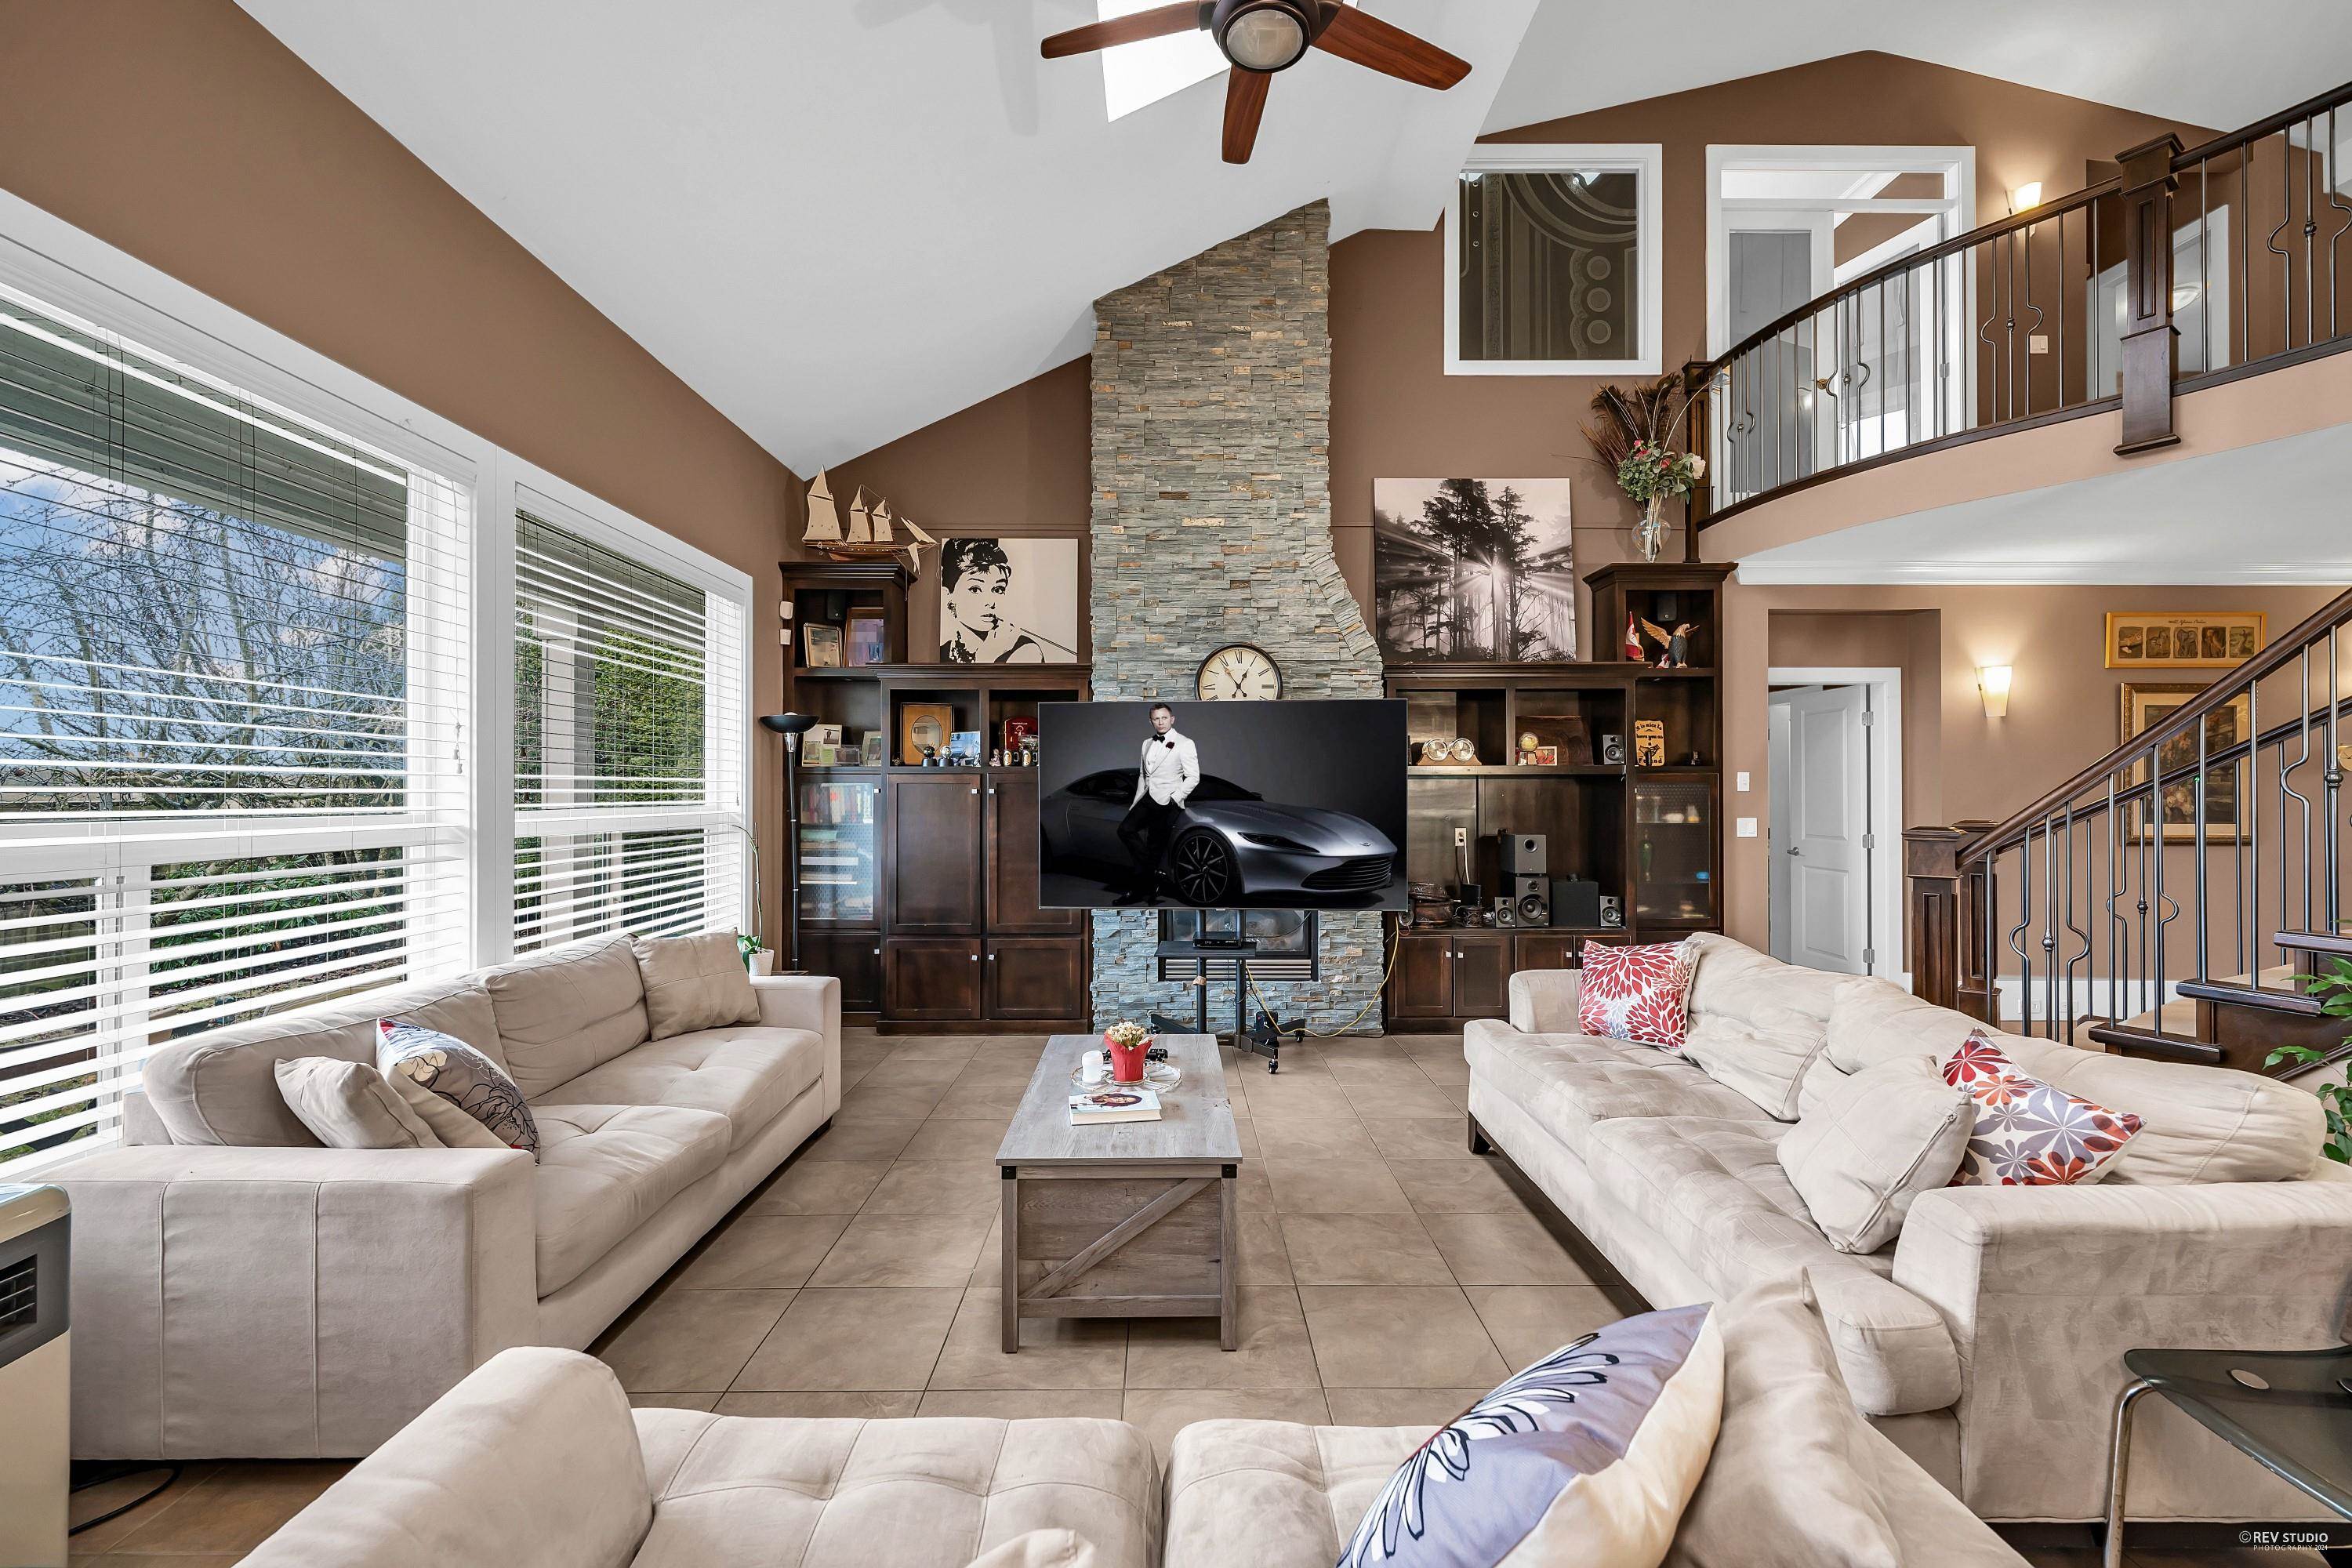 LR with vaulted ceilings, fireplace, skylights and large south facing windows